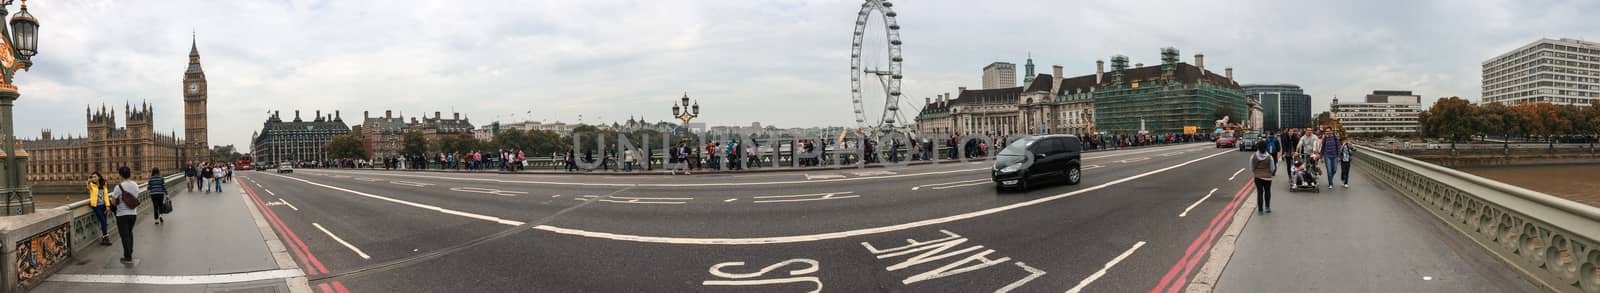 London. Westminster area panoramic view by jovannig